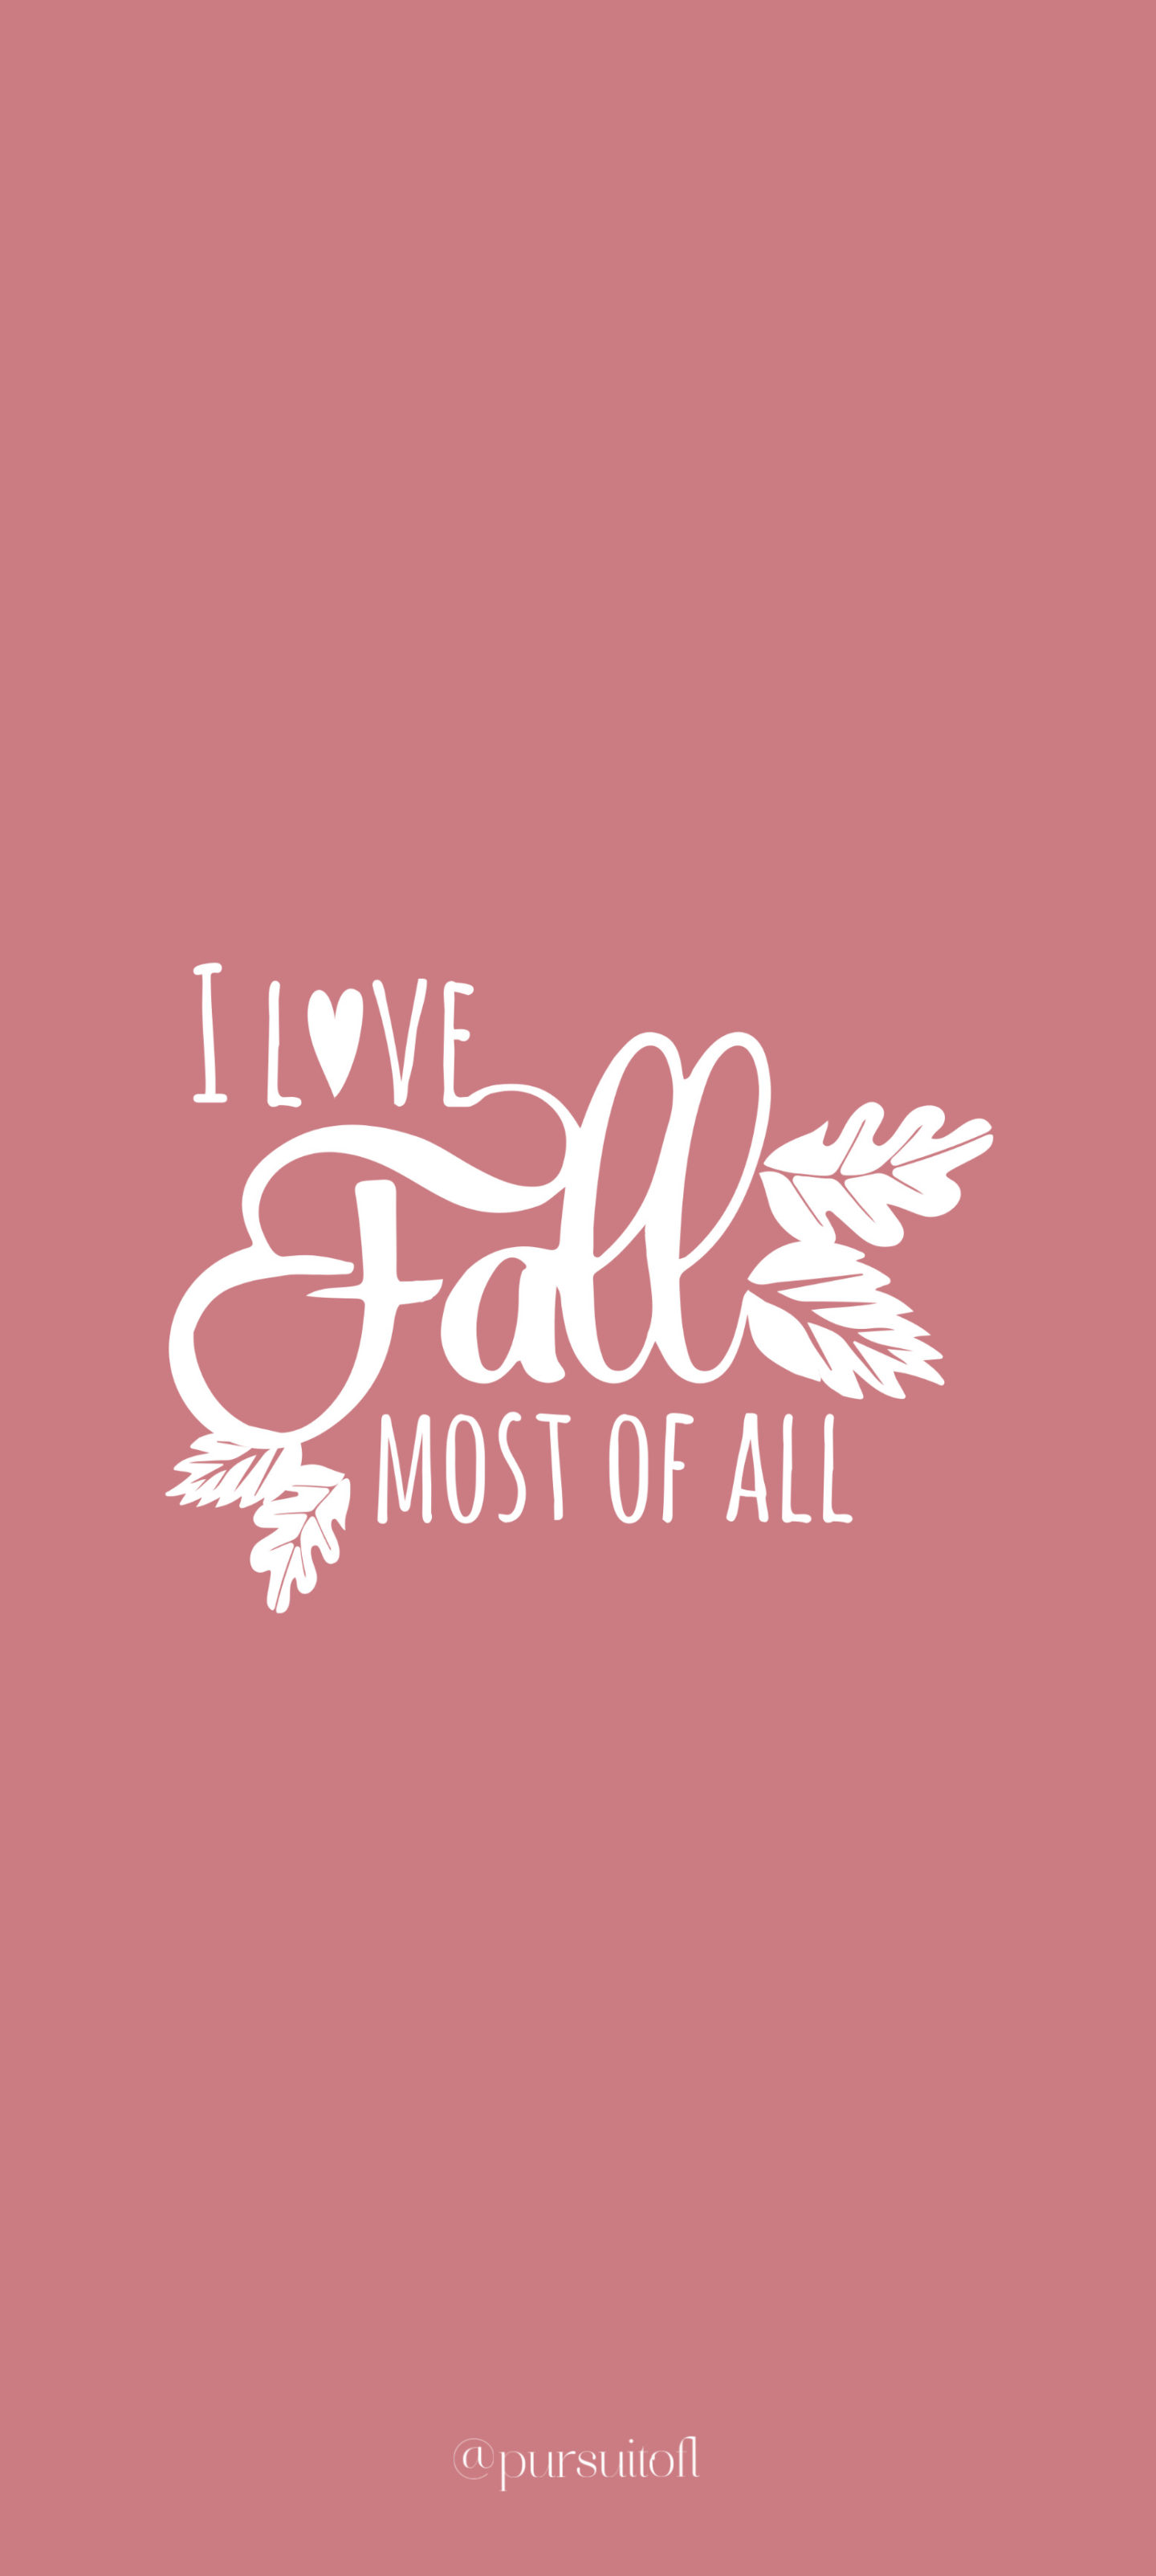 Grapefruit/pink color phone wallpaper with I love fall most of all text in white